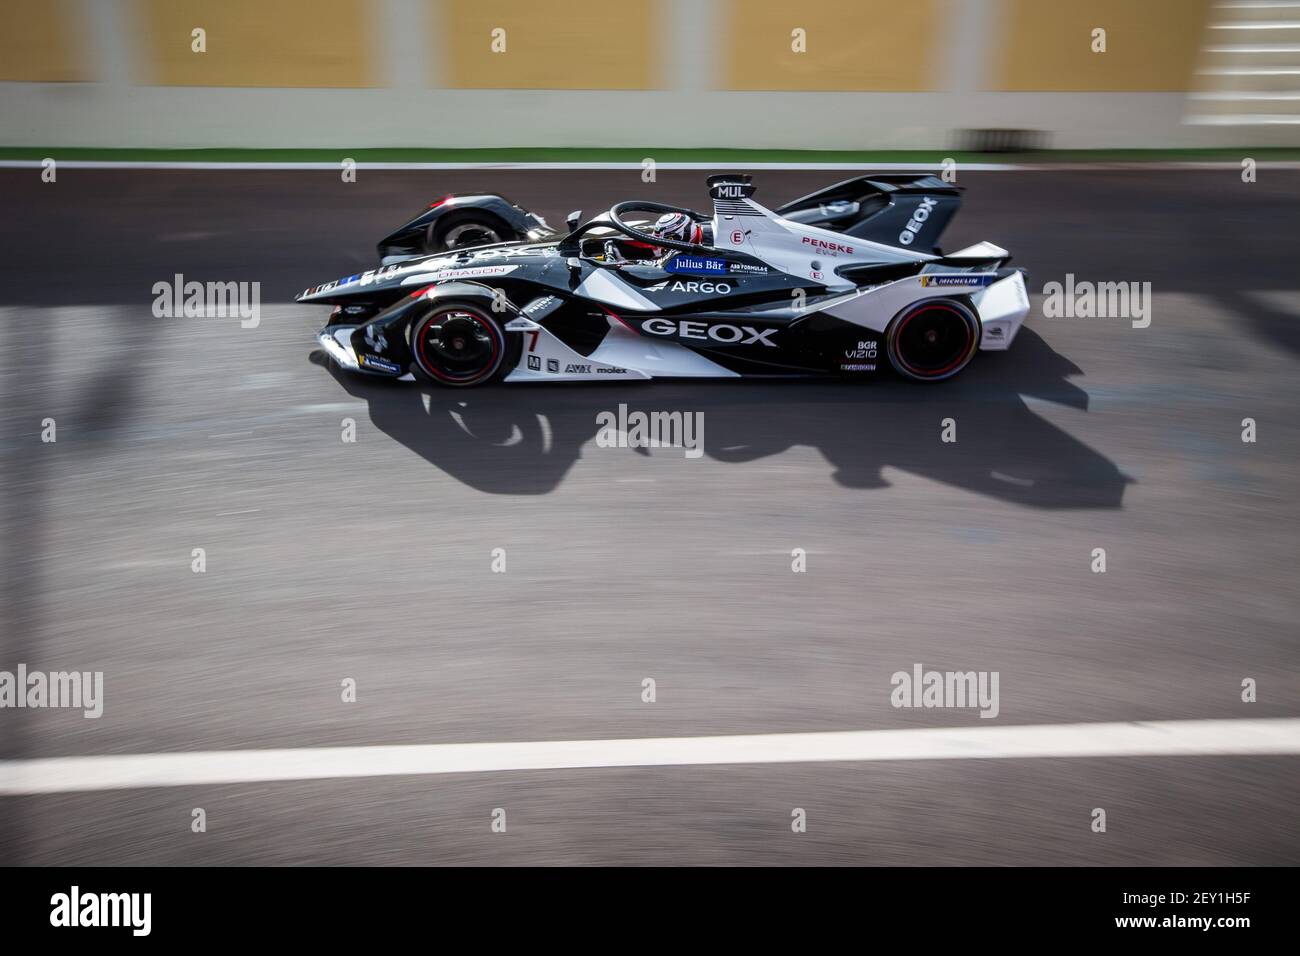 07 MULLER Nico (swi), Spark-Penske Penske EV-4, Geox Dragon, action stand  pit lane during the Marrakesh E-Prix 2020, 5th round of the 2019-20 Formula  E championship, on the Circuit International Automobile Moulay